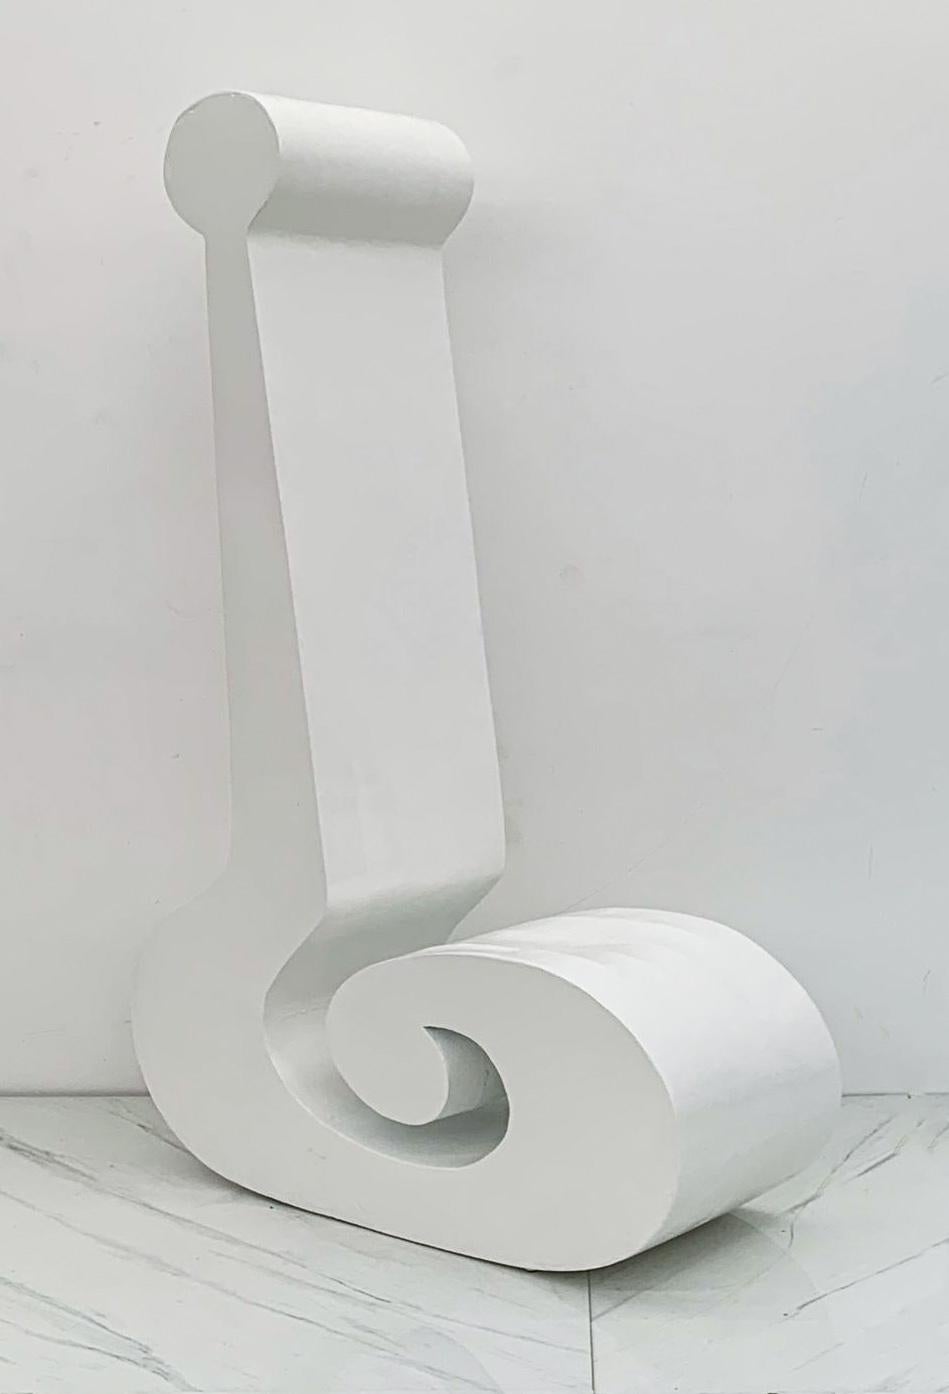 French Louis Durot Question Mark Chair Sculpture, France, C. 1990's